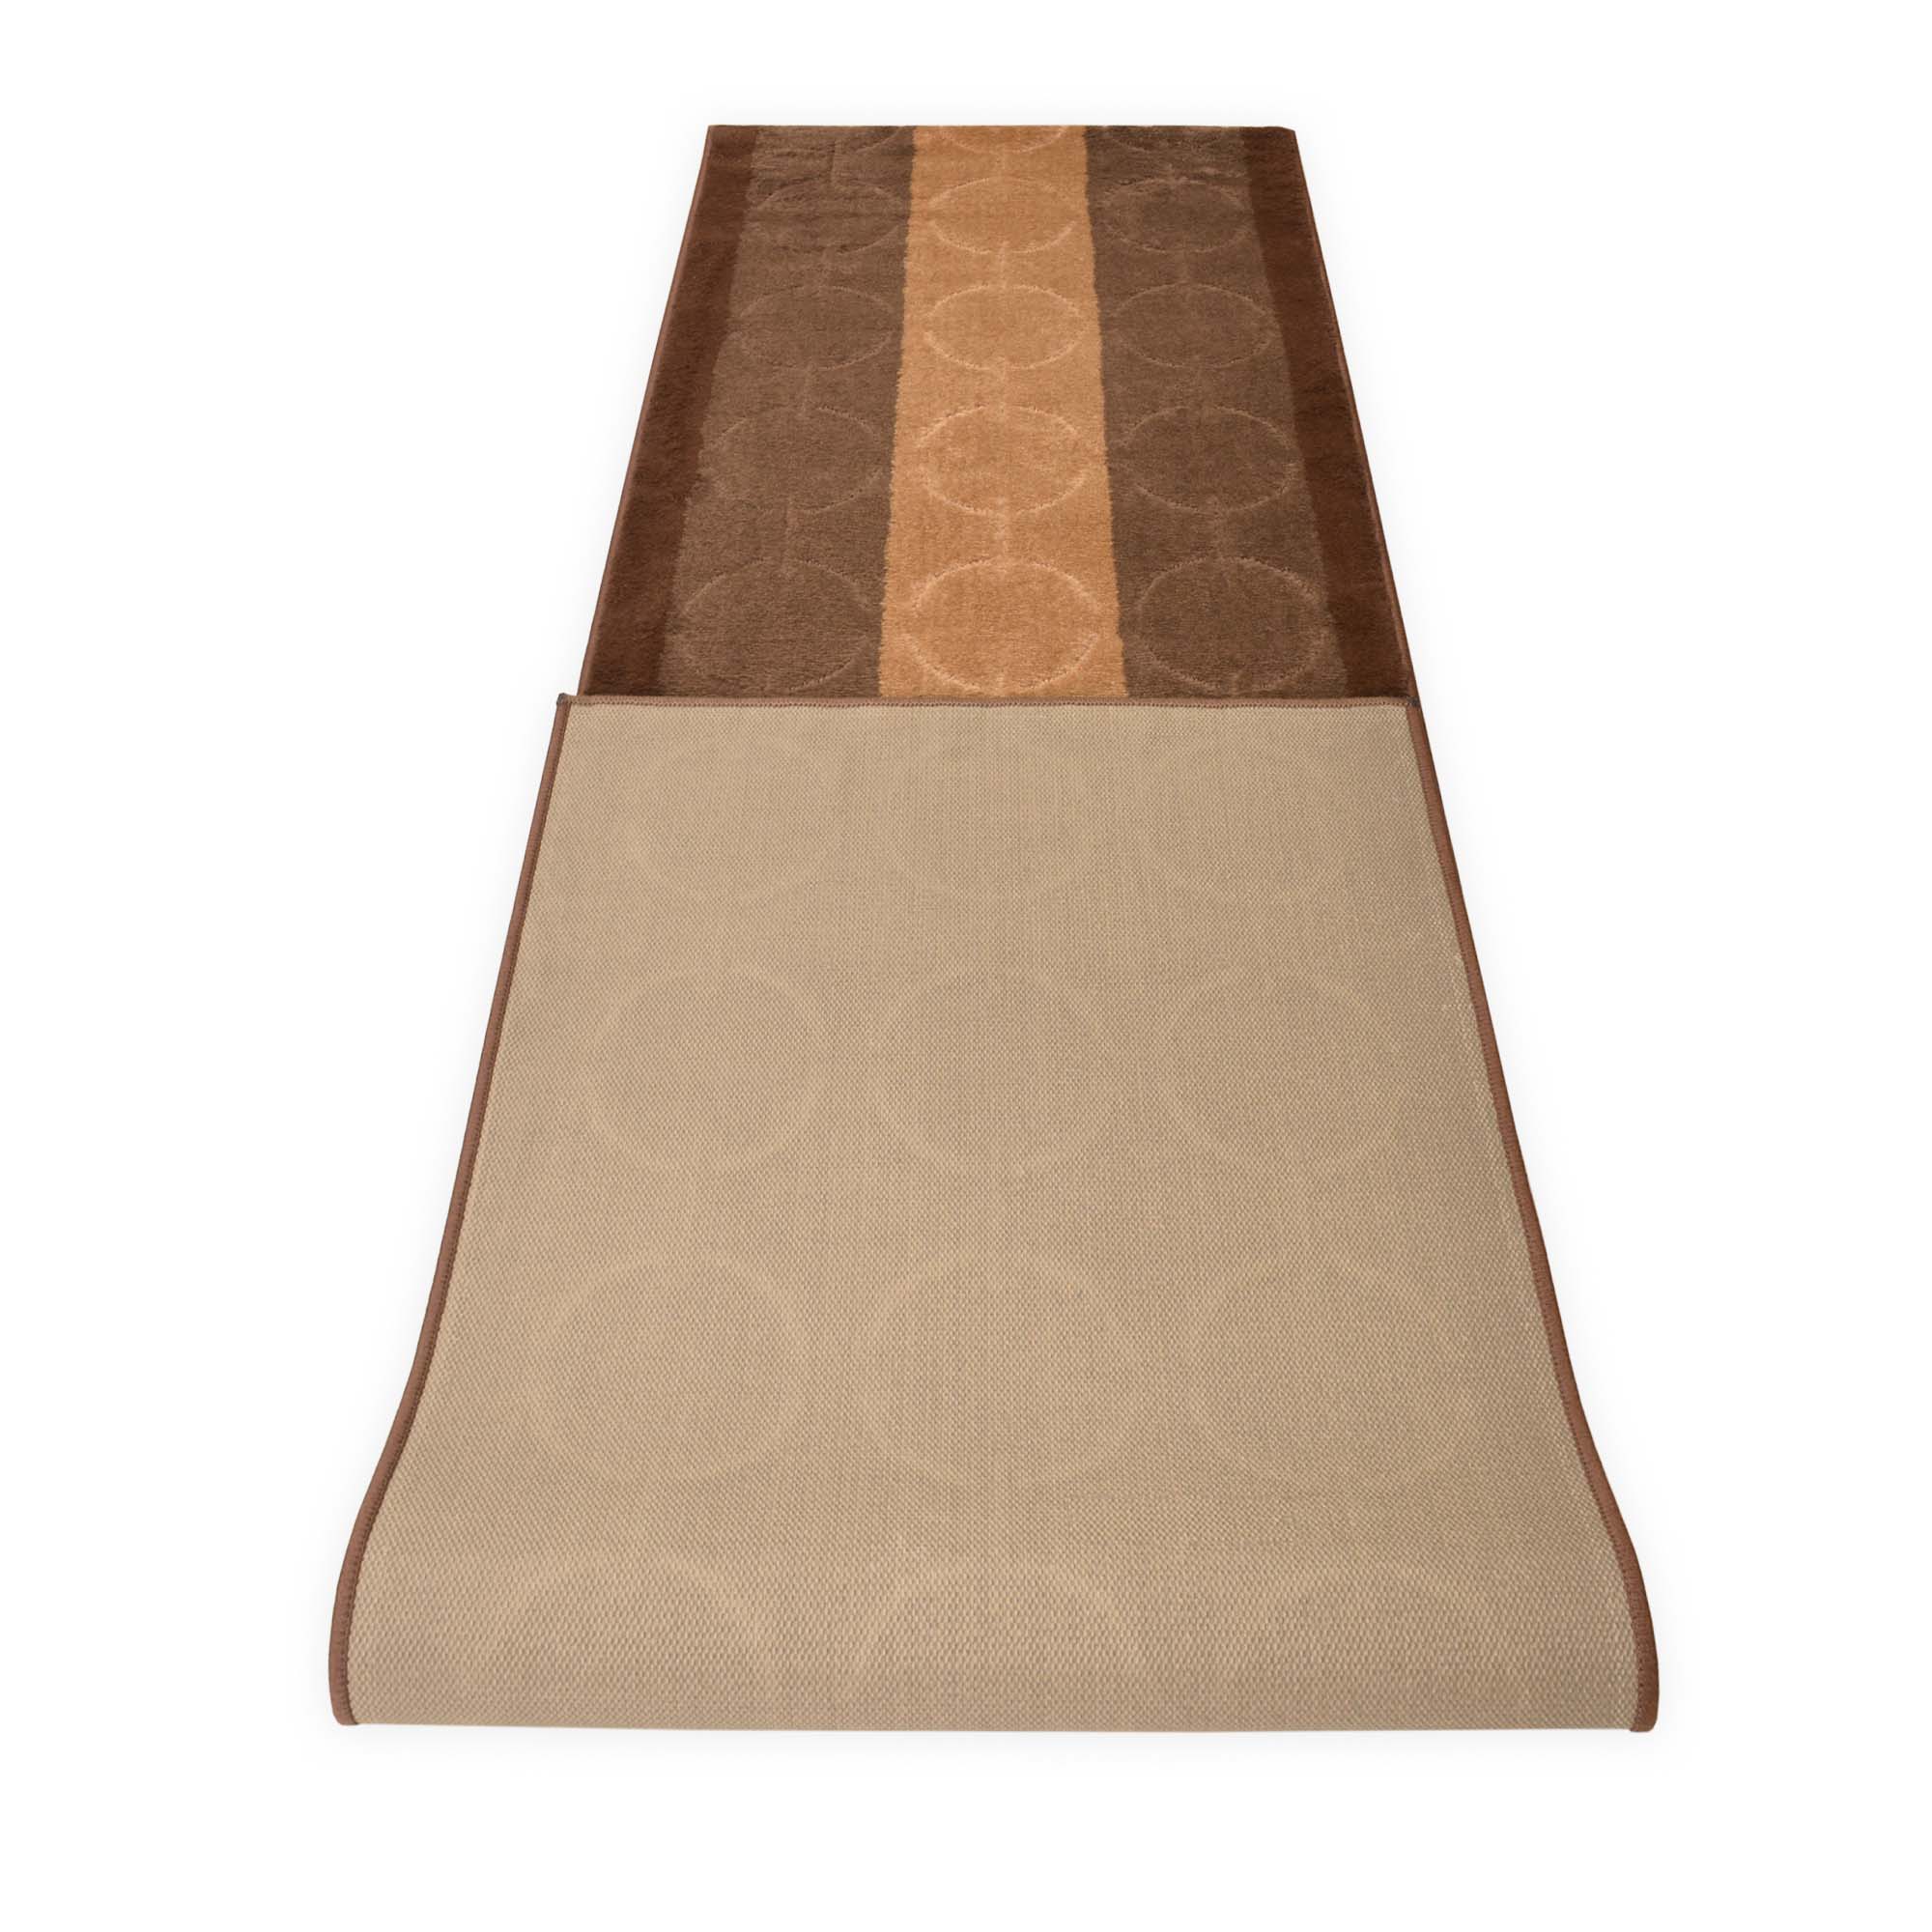 Machine Washable Custom Size Runner Rug Platin Circles Abstract Brown Skid Resistant Runner Rug  Customize Up to 50 Feet and 36 Inch Width Runner Rug-3